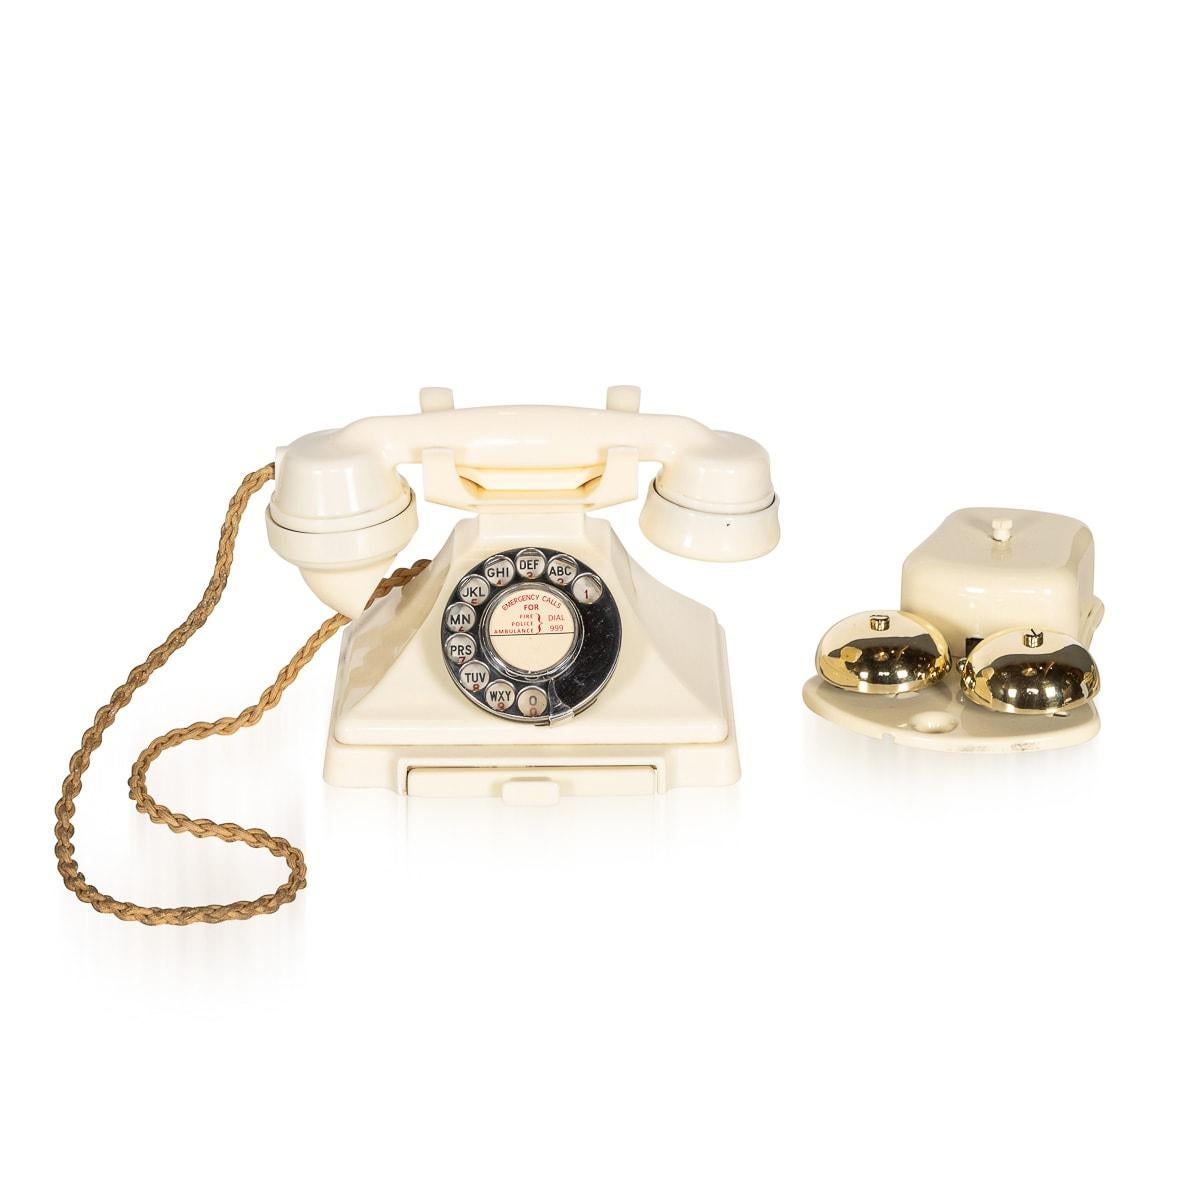 A superb 20th Century rotary Bakelite telephone and bell system. The phone features the original cord connecting handset to reciever and a small drawer at the front revealing a pad for telephone numbers. There is a bell sysem which can be attached